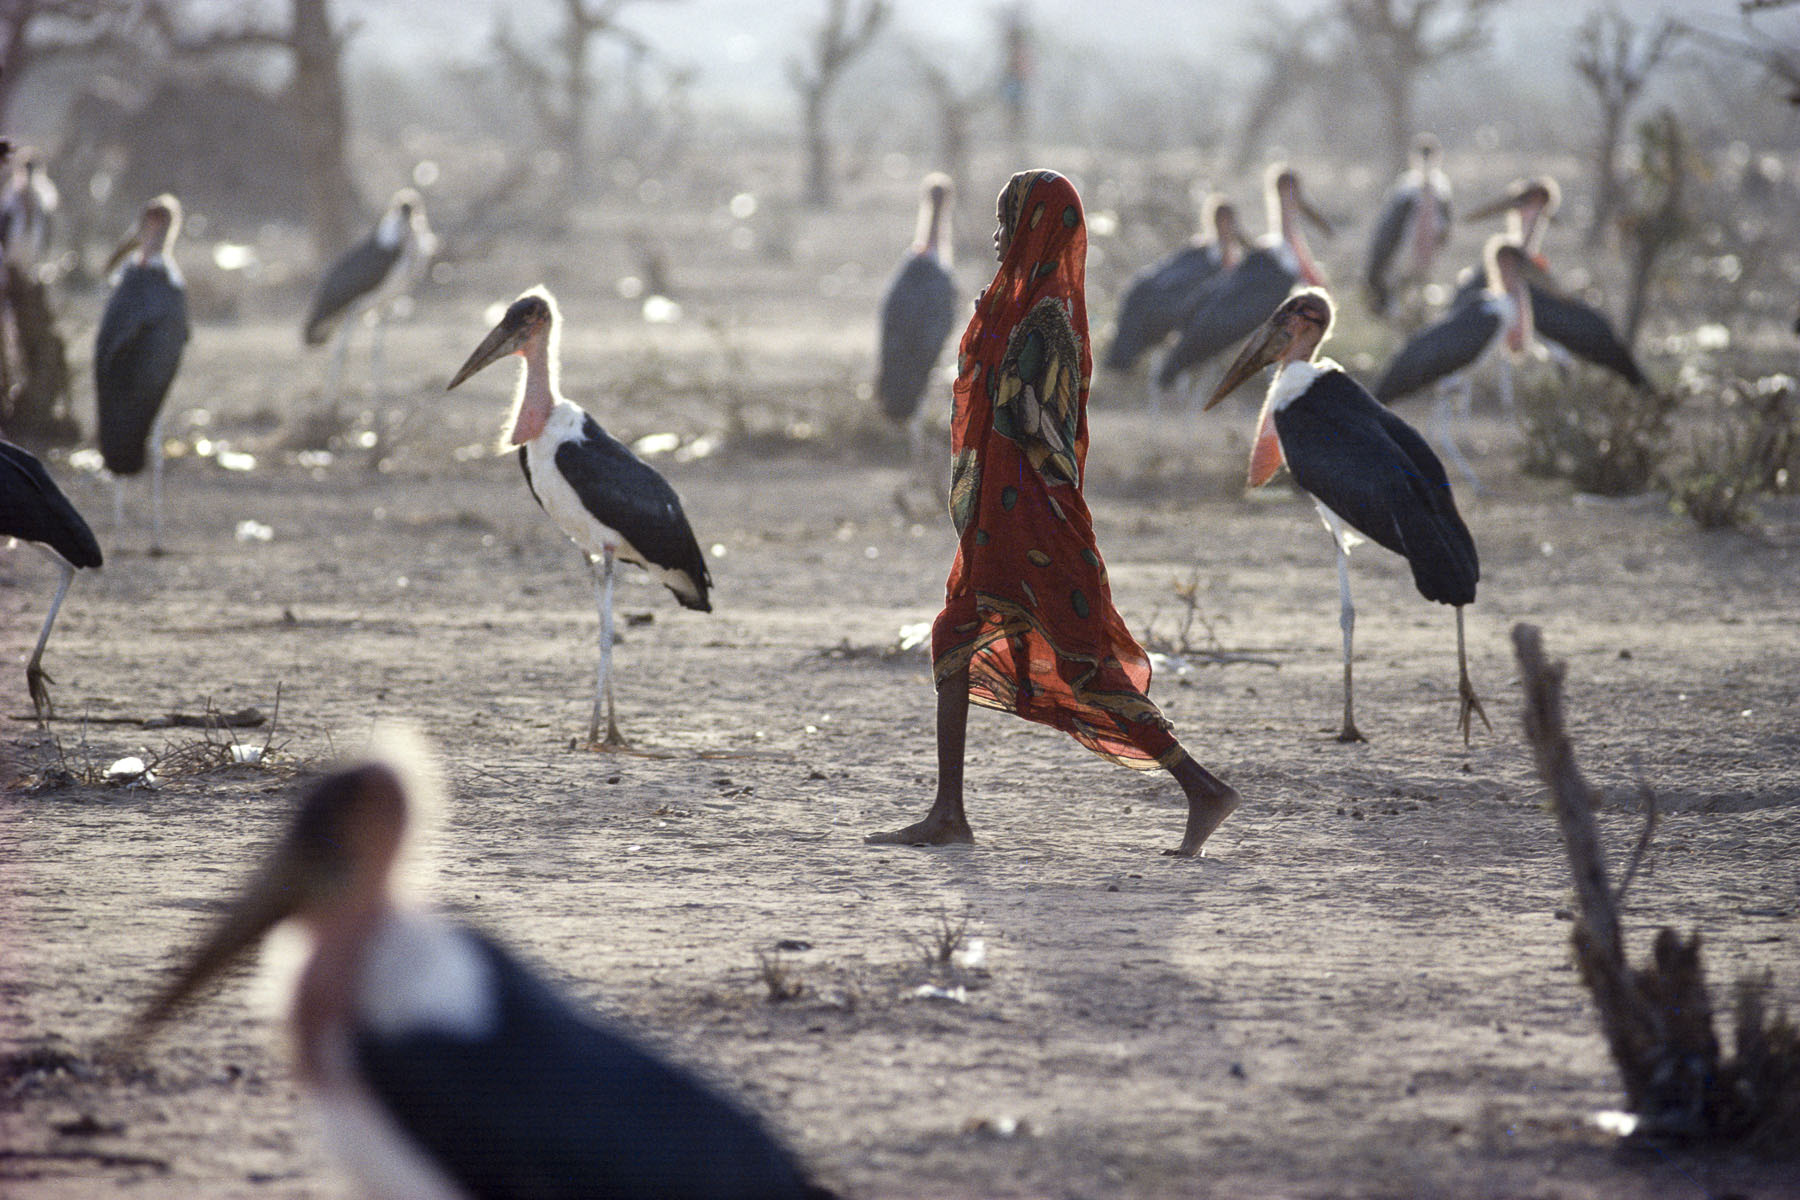 A young Somali refugee crosses a field filled with marabous storks in July 1992